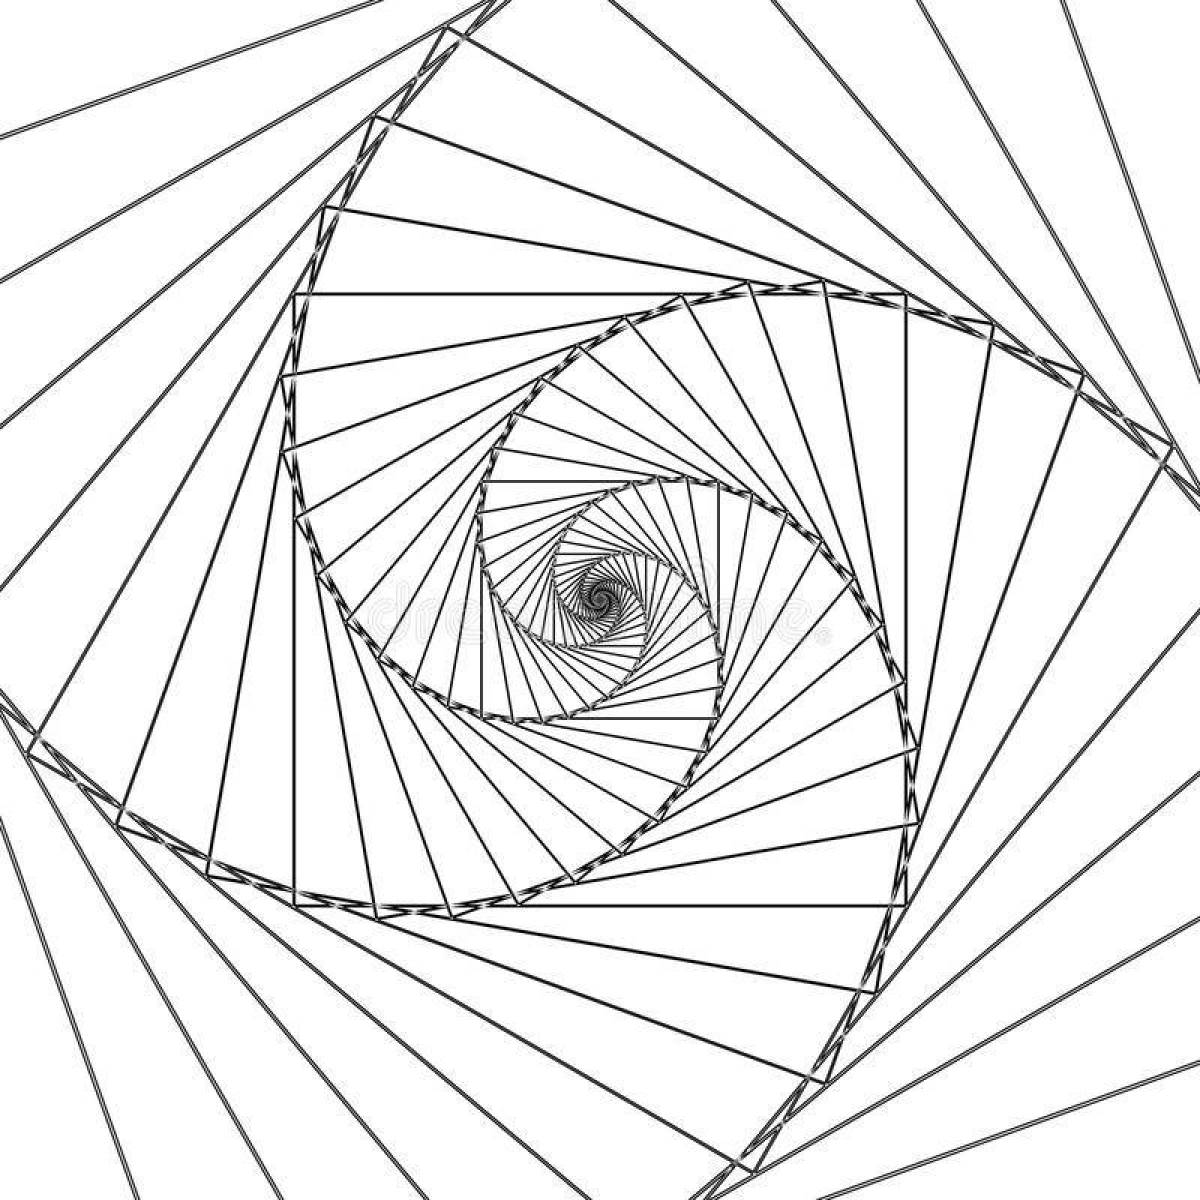 Gorgeous coloring page with spiral pattern